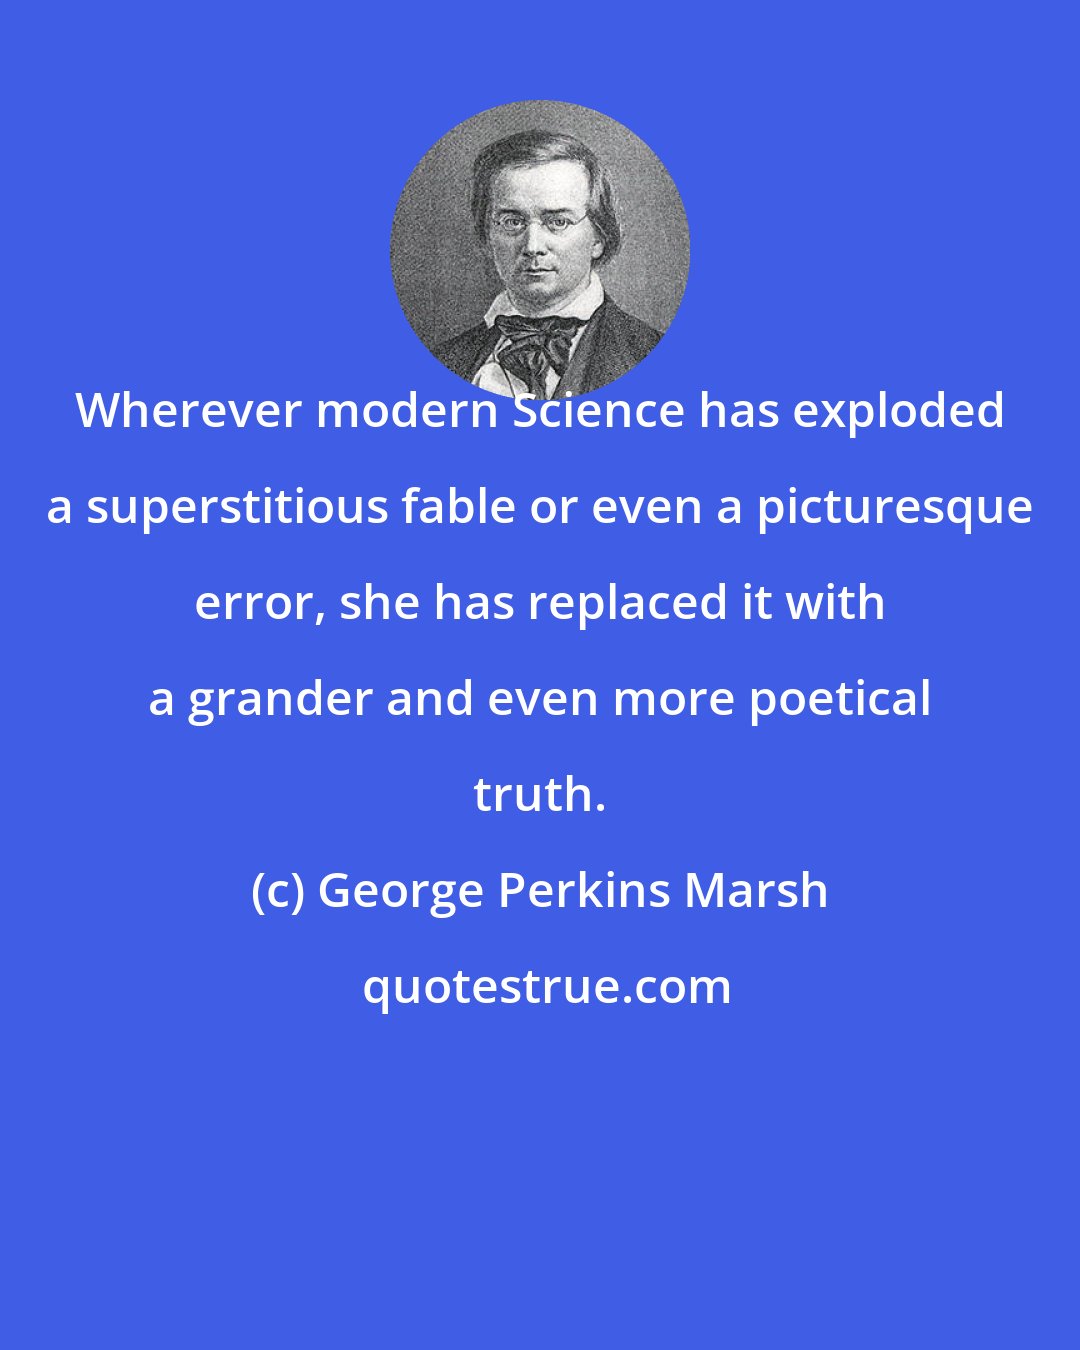 George Perkins Marsh: Wherever modern Science has exploded a superstitious fable or even a picturesque error, she has replaced it with a grander and even more poetical truth.